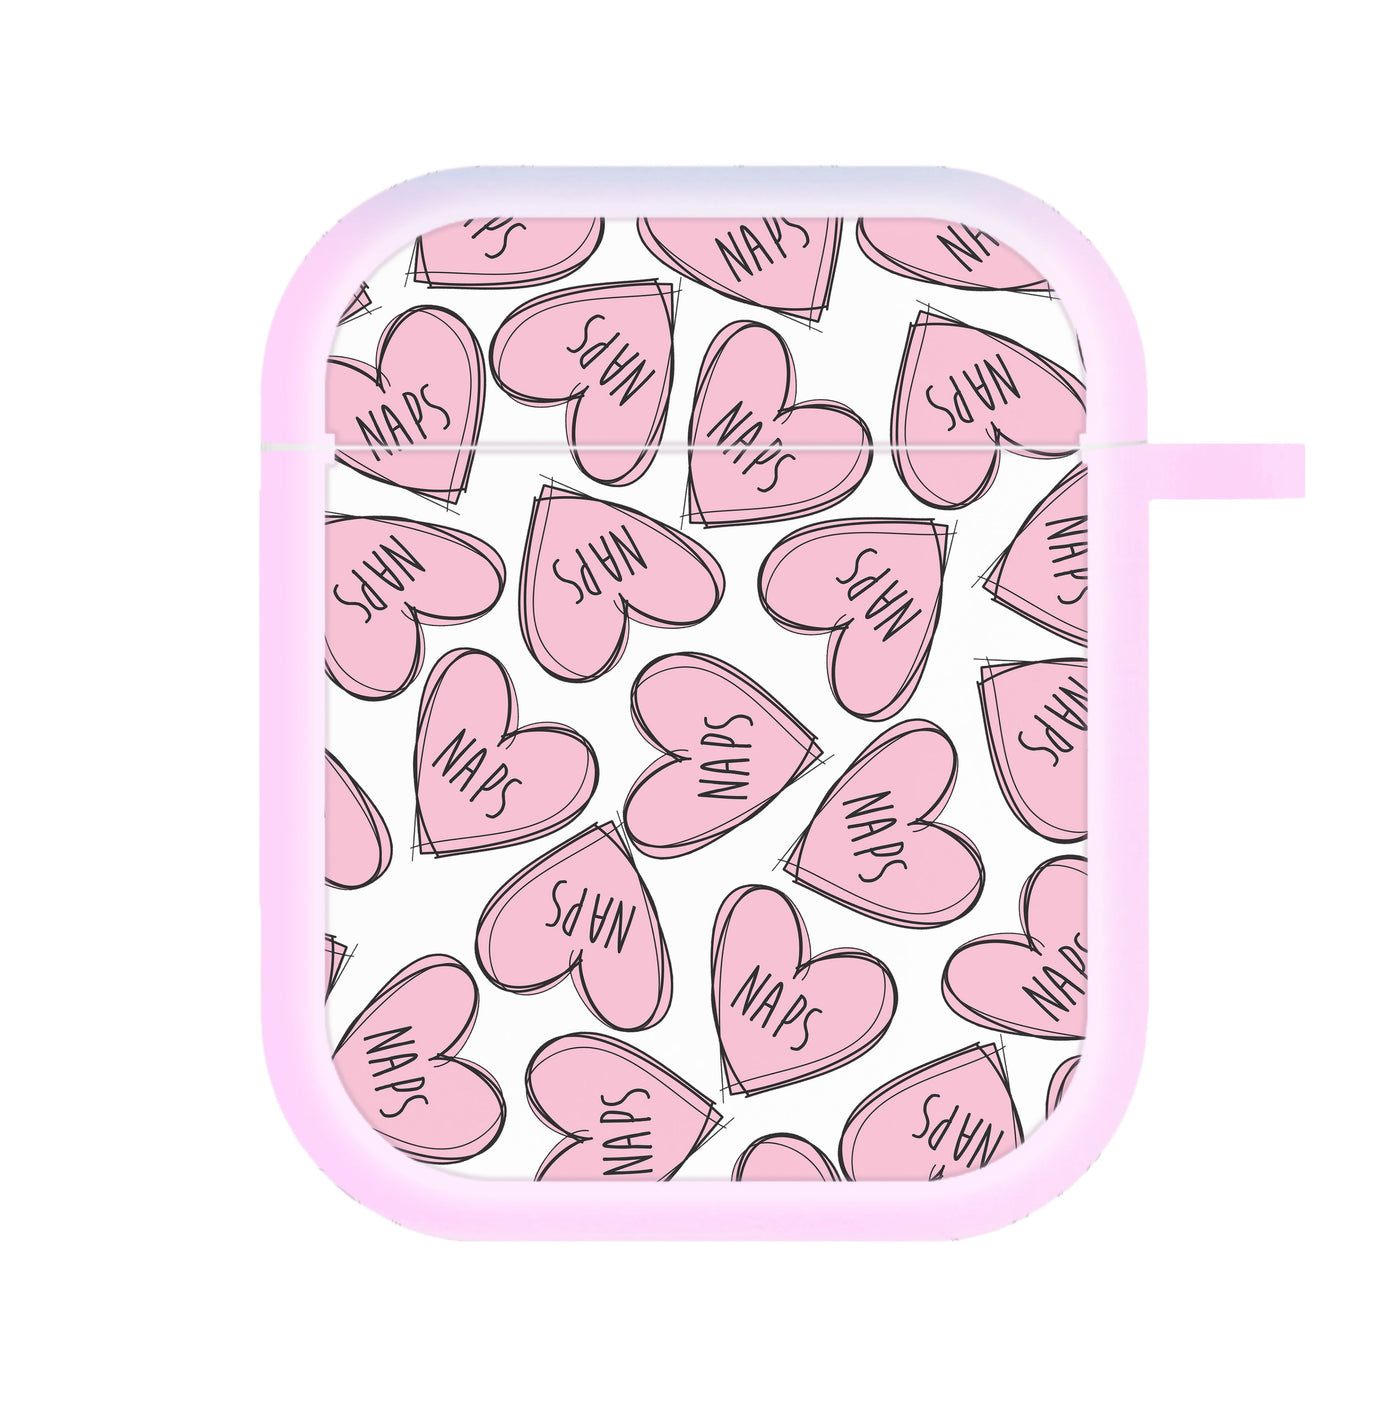 Nap Hearts, Tumblr Inspired AirPods Case